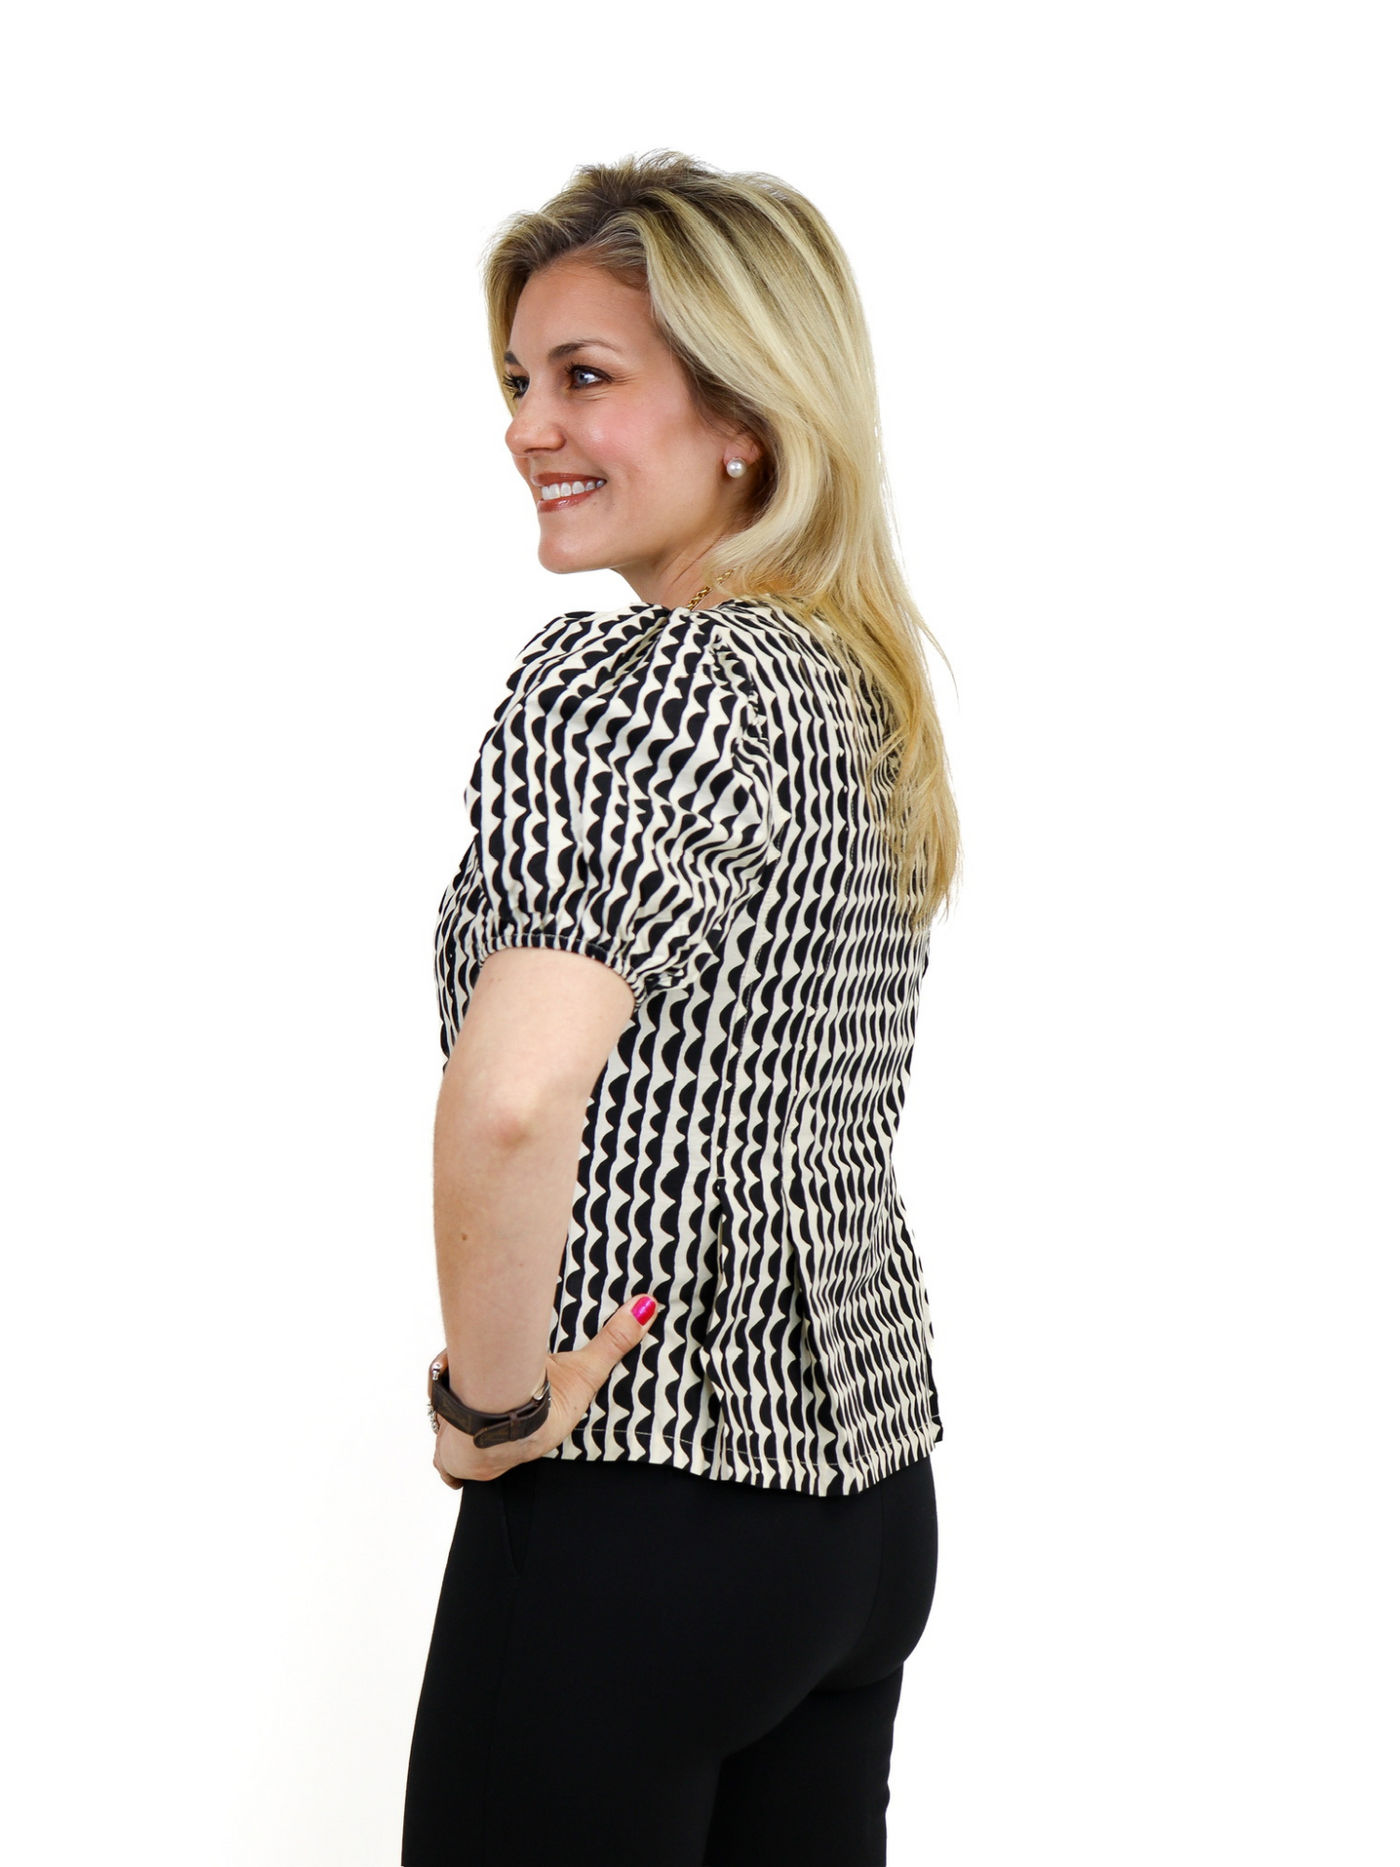 Pleated Short Sleeve Blouse - Black/Ivory side view.